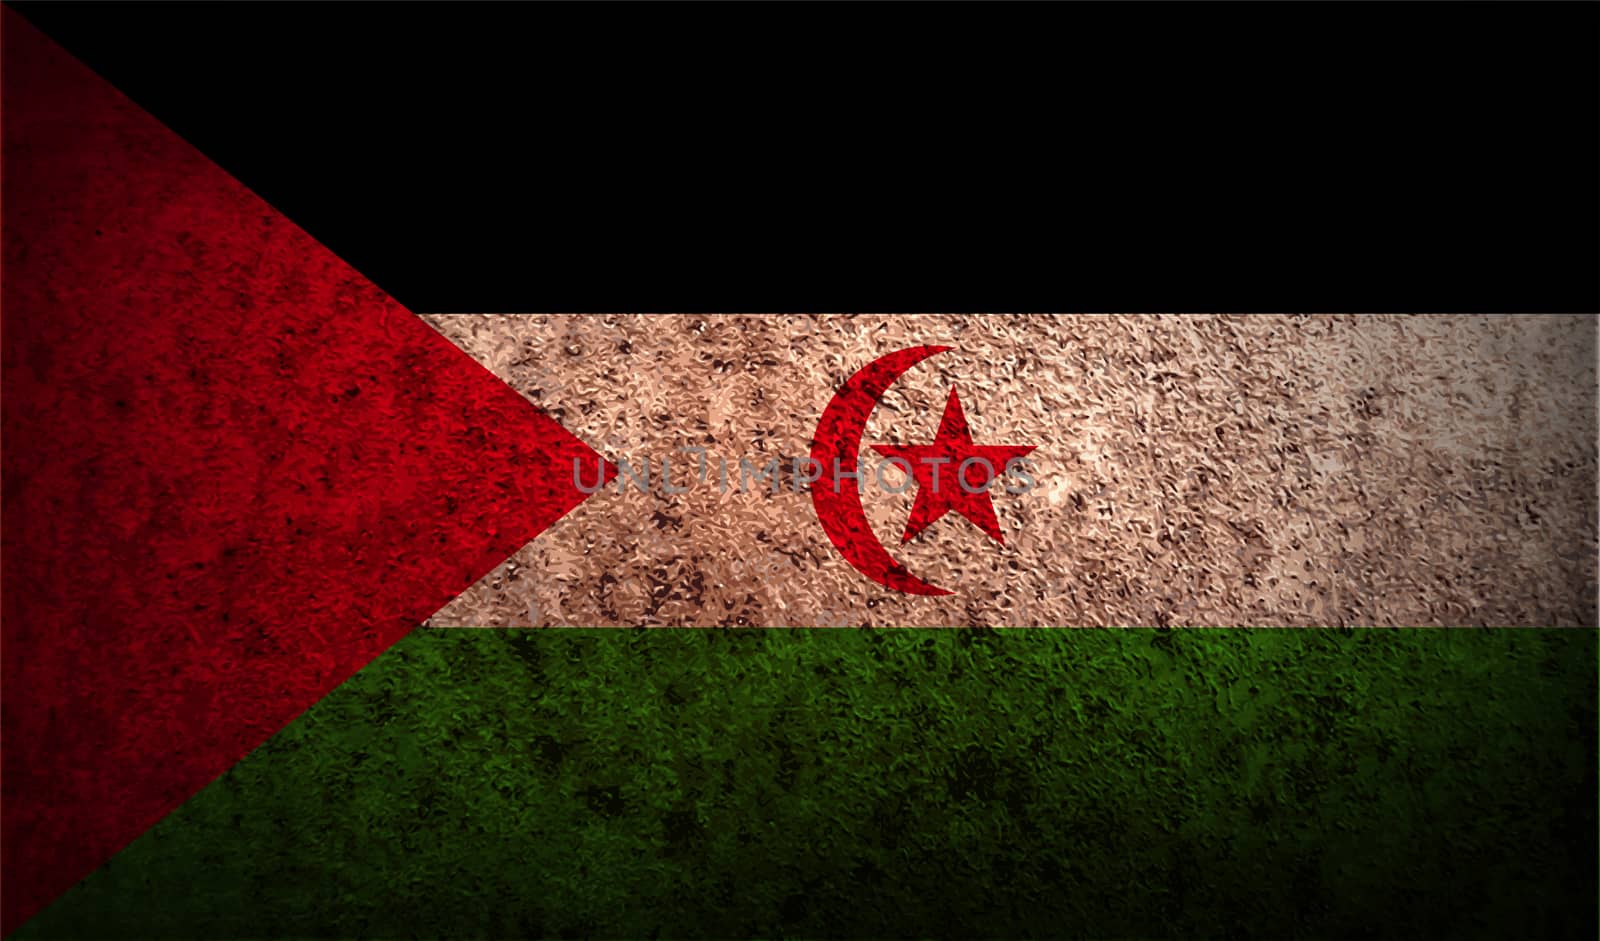 Flag of Western Sahara with old texture.  illustration